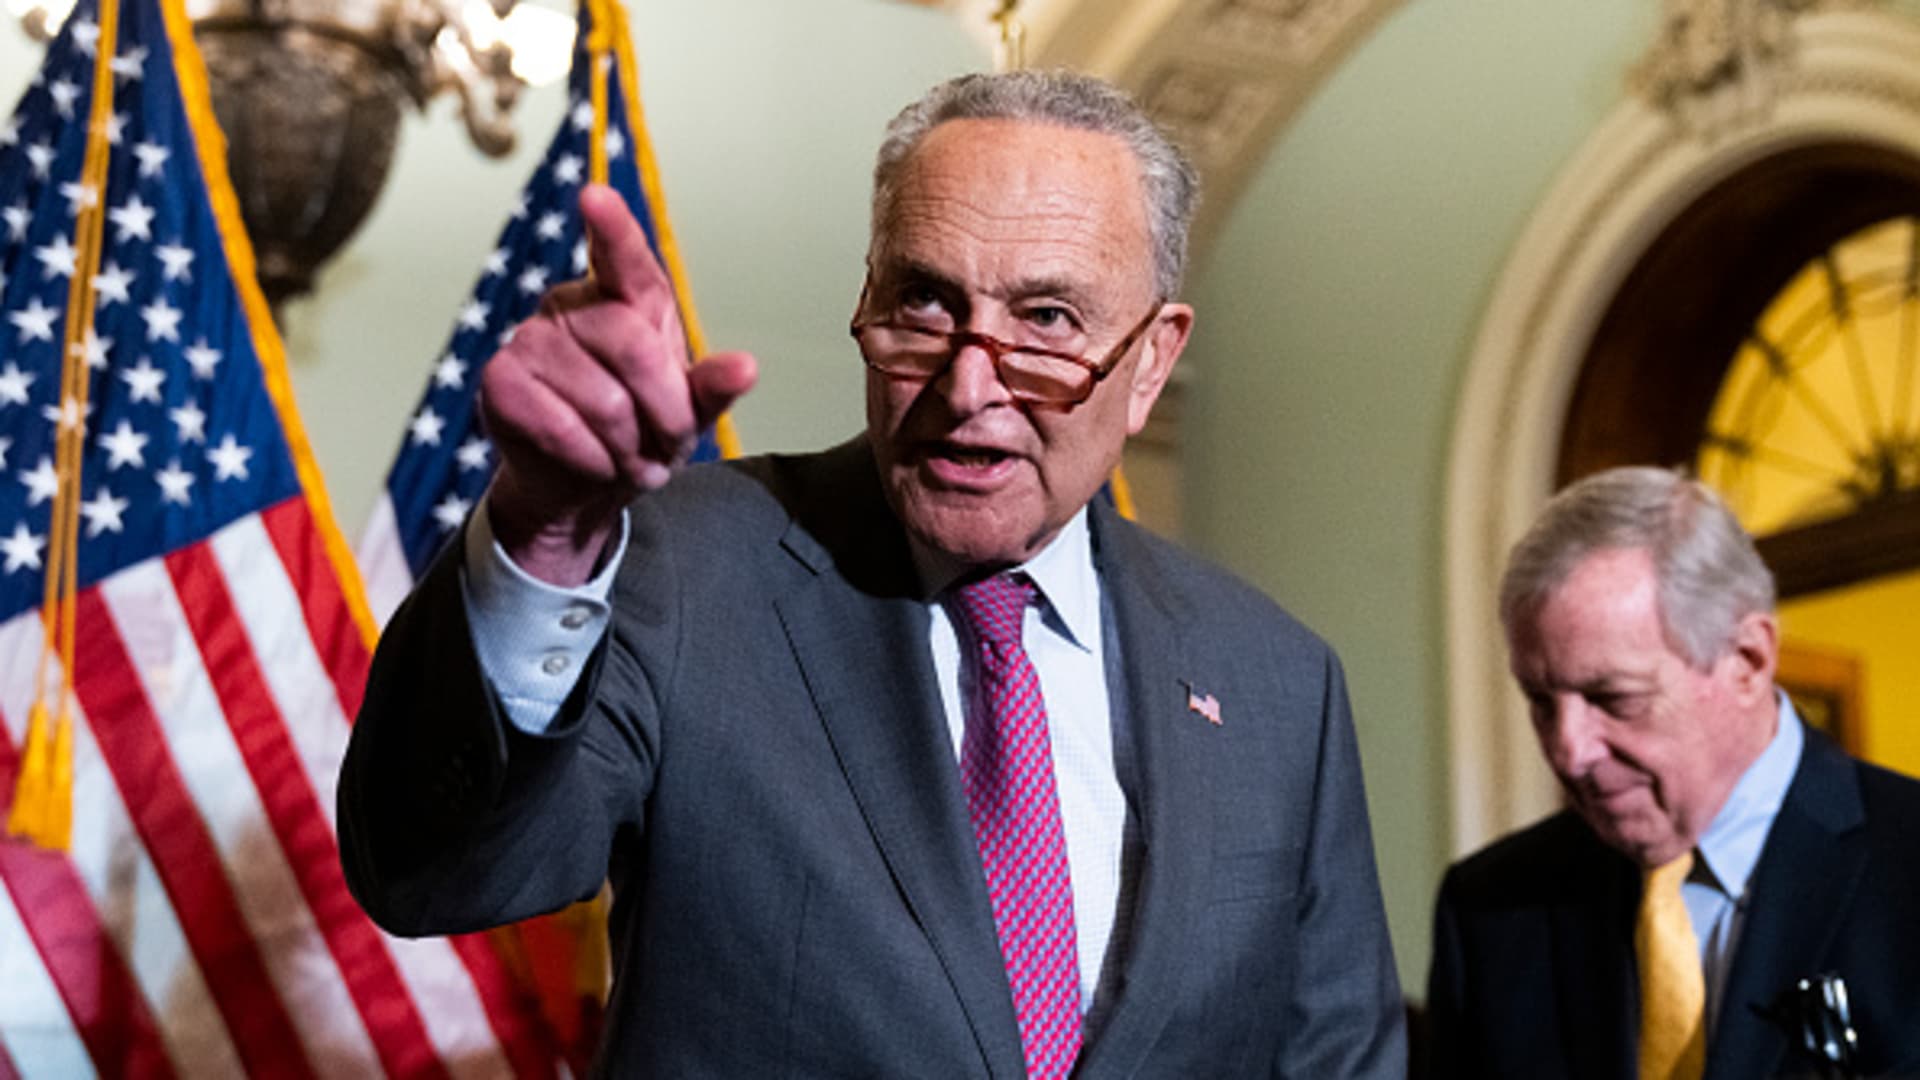 Schumer says Democrats want to craft gun reforms with GOP after Texas school massacre